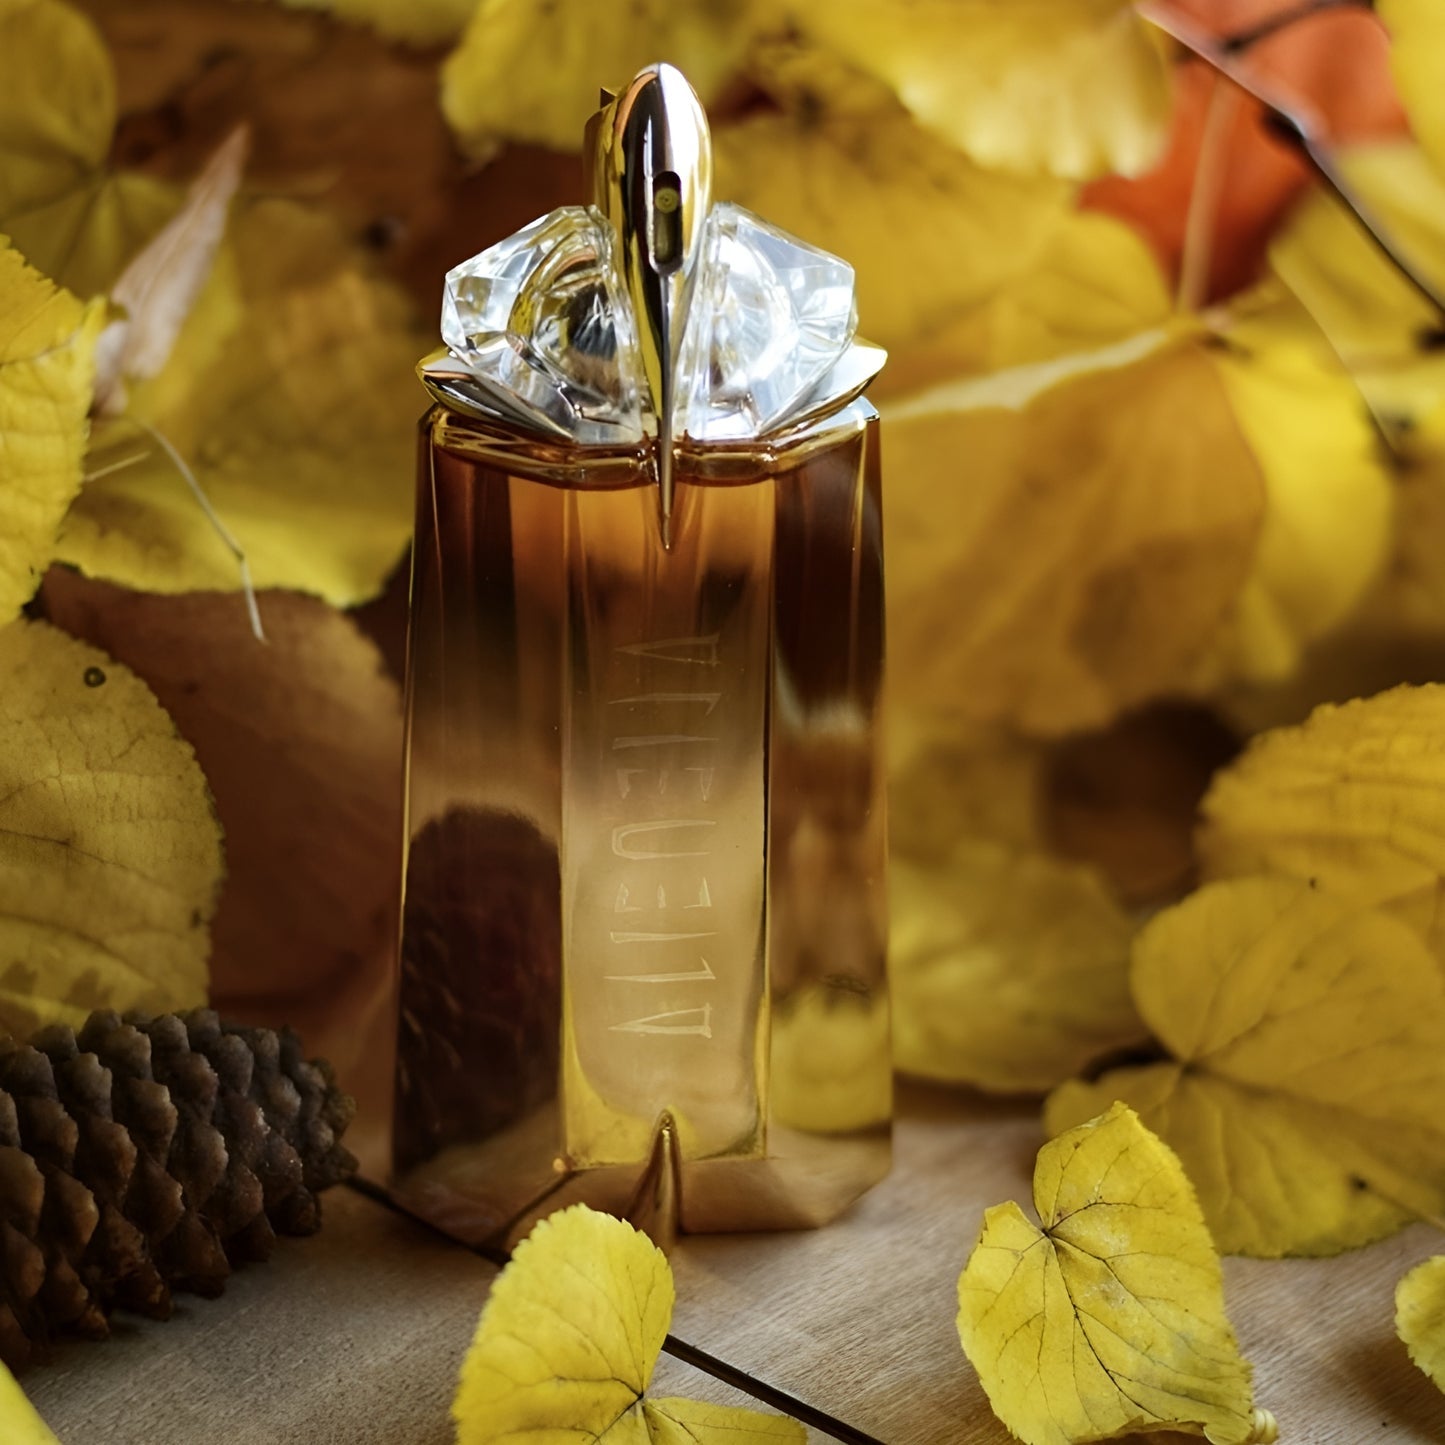 Alien Oud Majestueux by Thierry Mugler